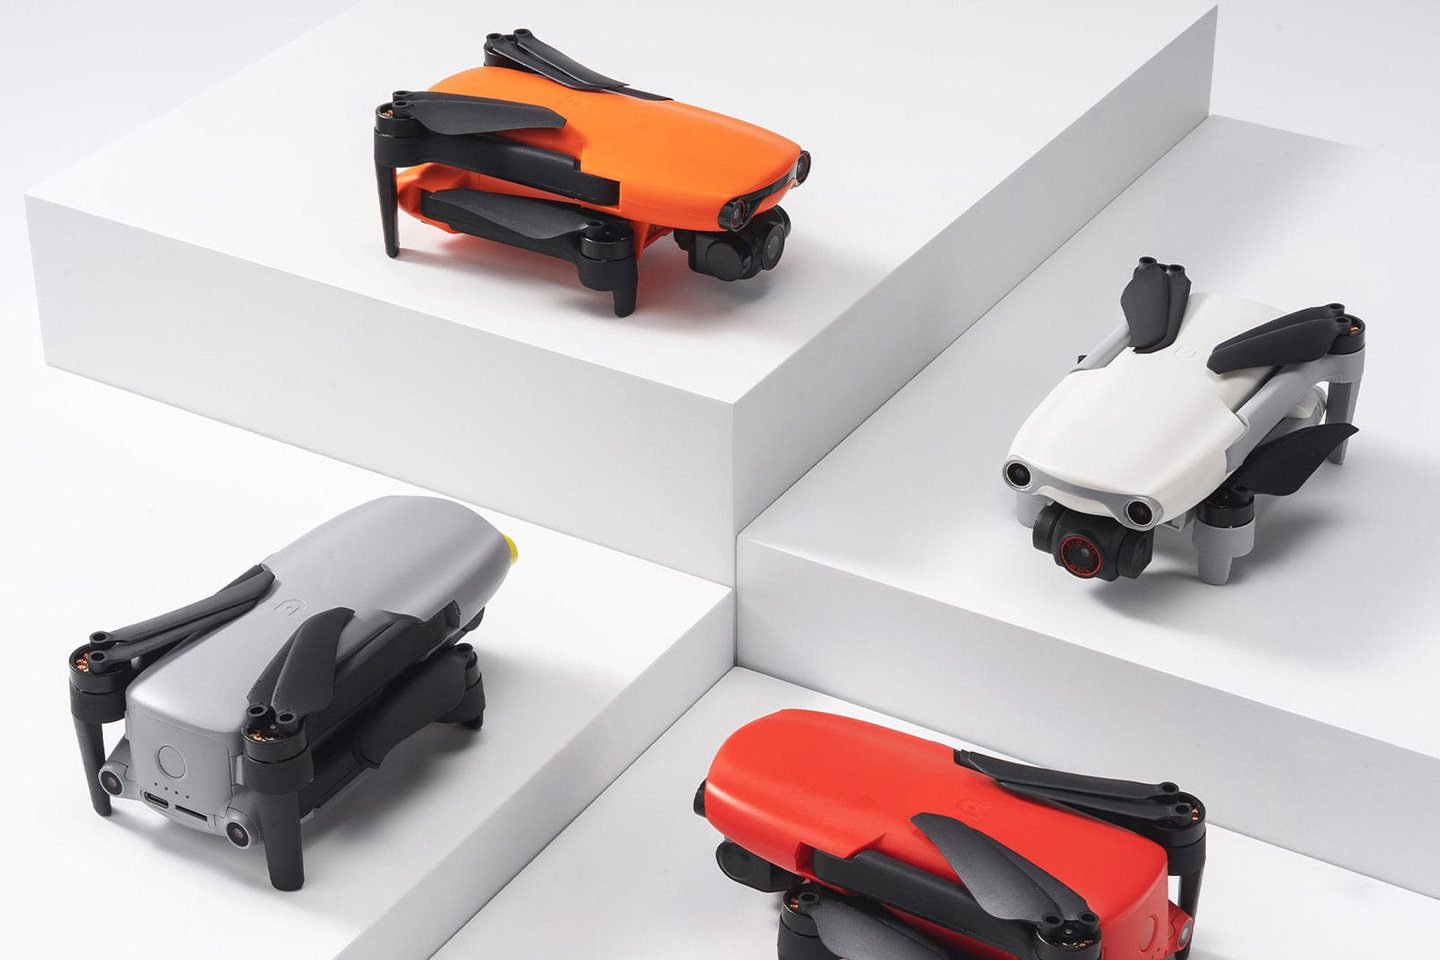 #The Autel EVO Nano+ is a US-made pocket-sized consumer drone with a cinematic 4K camera